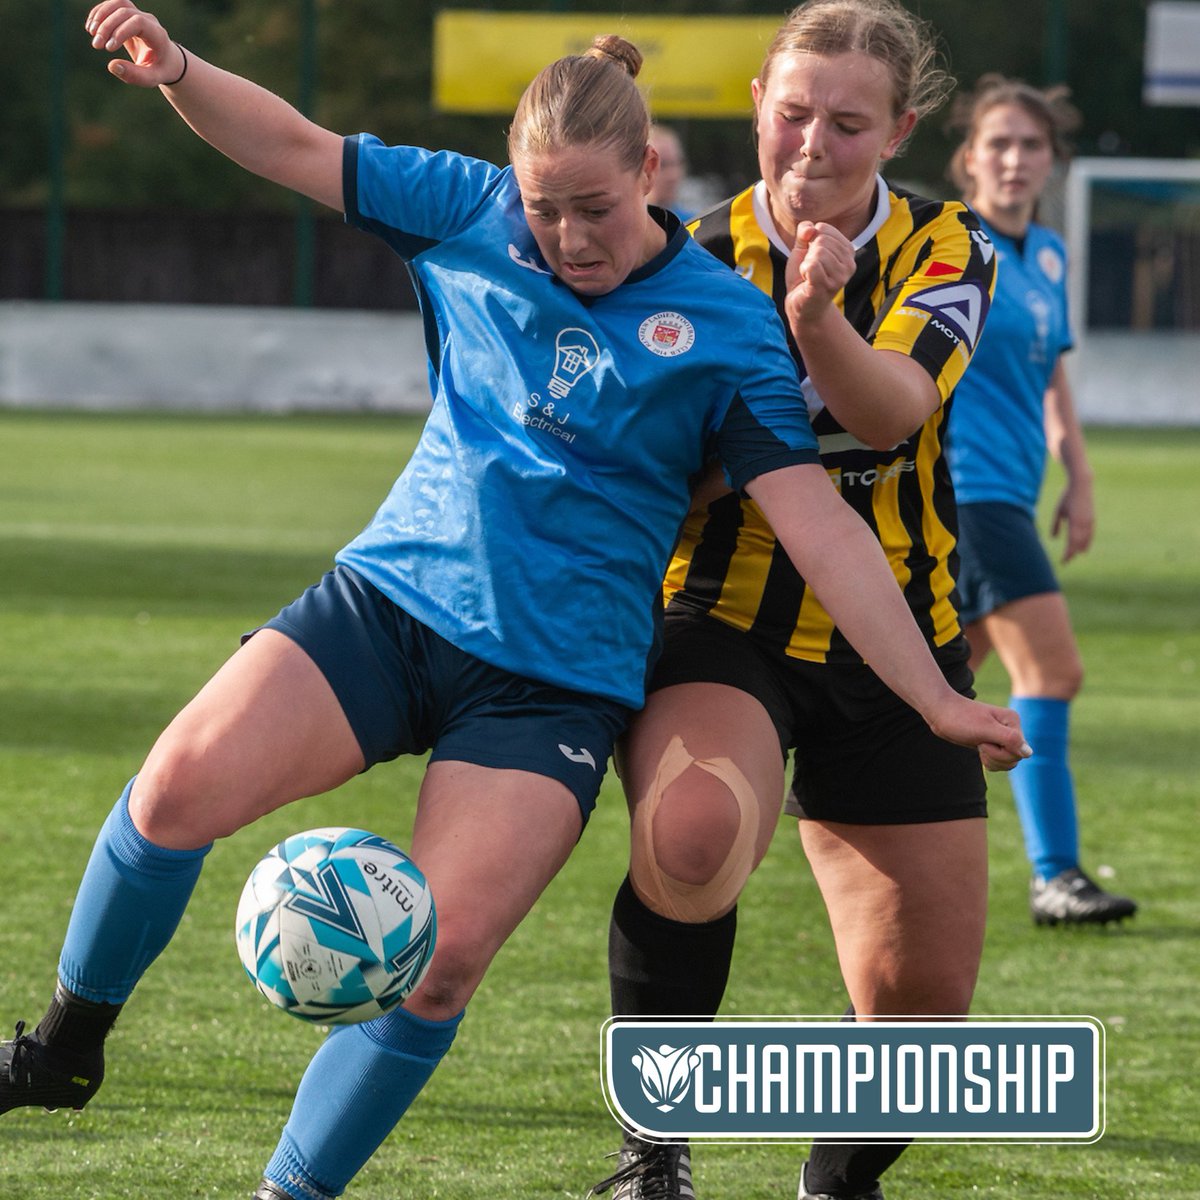 CHAMPIONSHIP ACTION Only one game in the #SWFChampionship this Sunday, as Renfrew look to make amends for their derby defeat against visiting Hutchison Vale. #BeTheDifference 📷 Russel Hutcheson | Sportpix